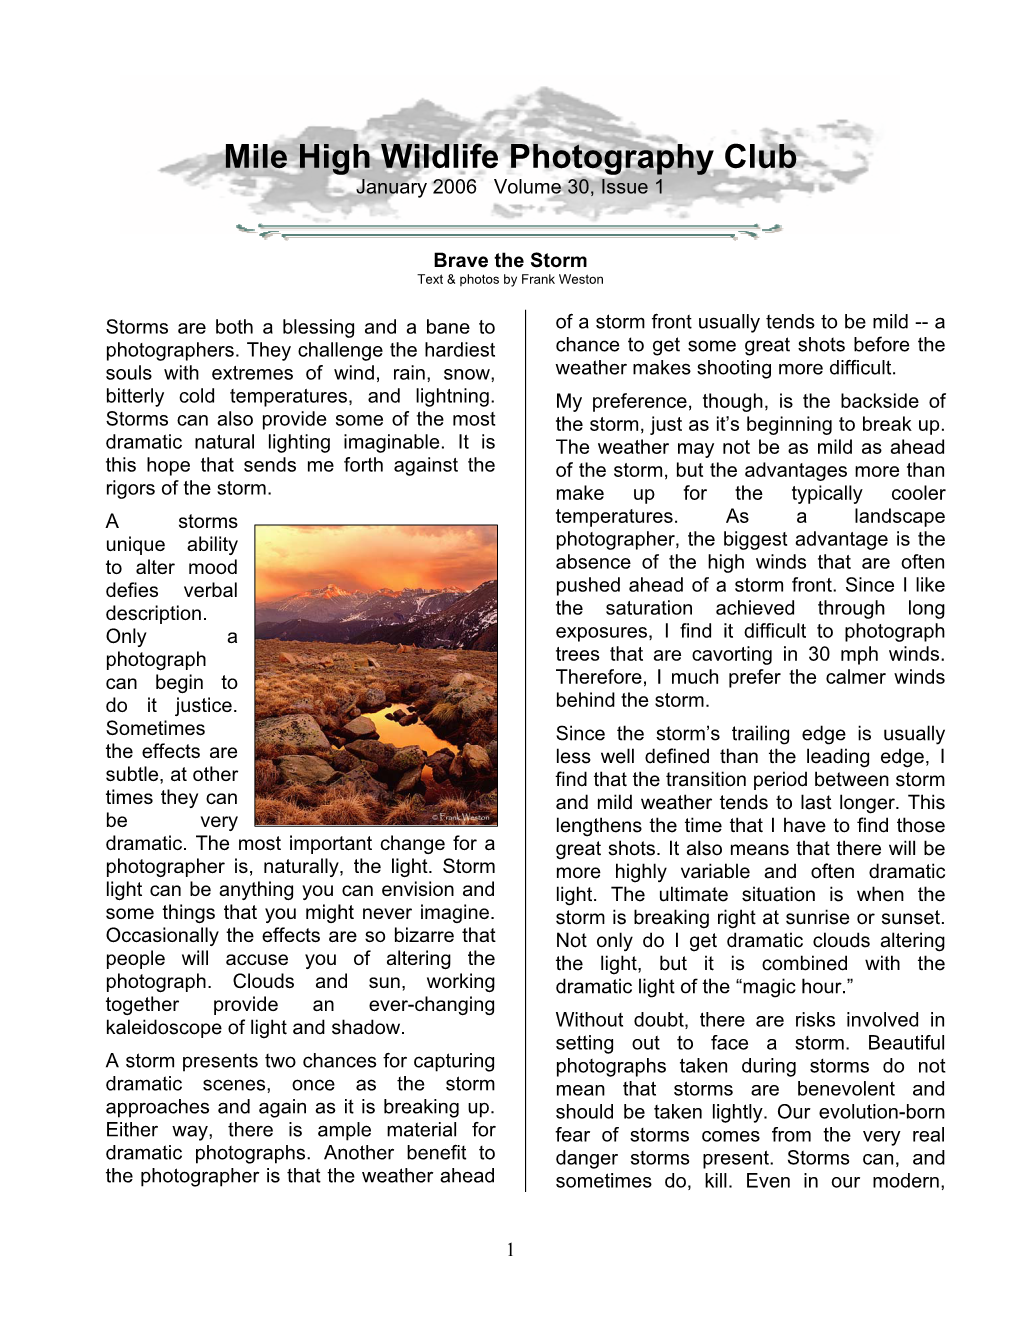 Mile High Wildlife Photography Club January 2006 Volume 30, Issue 1